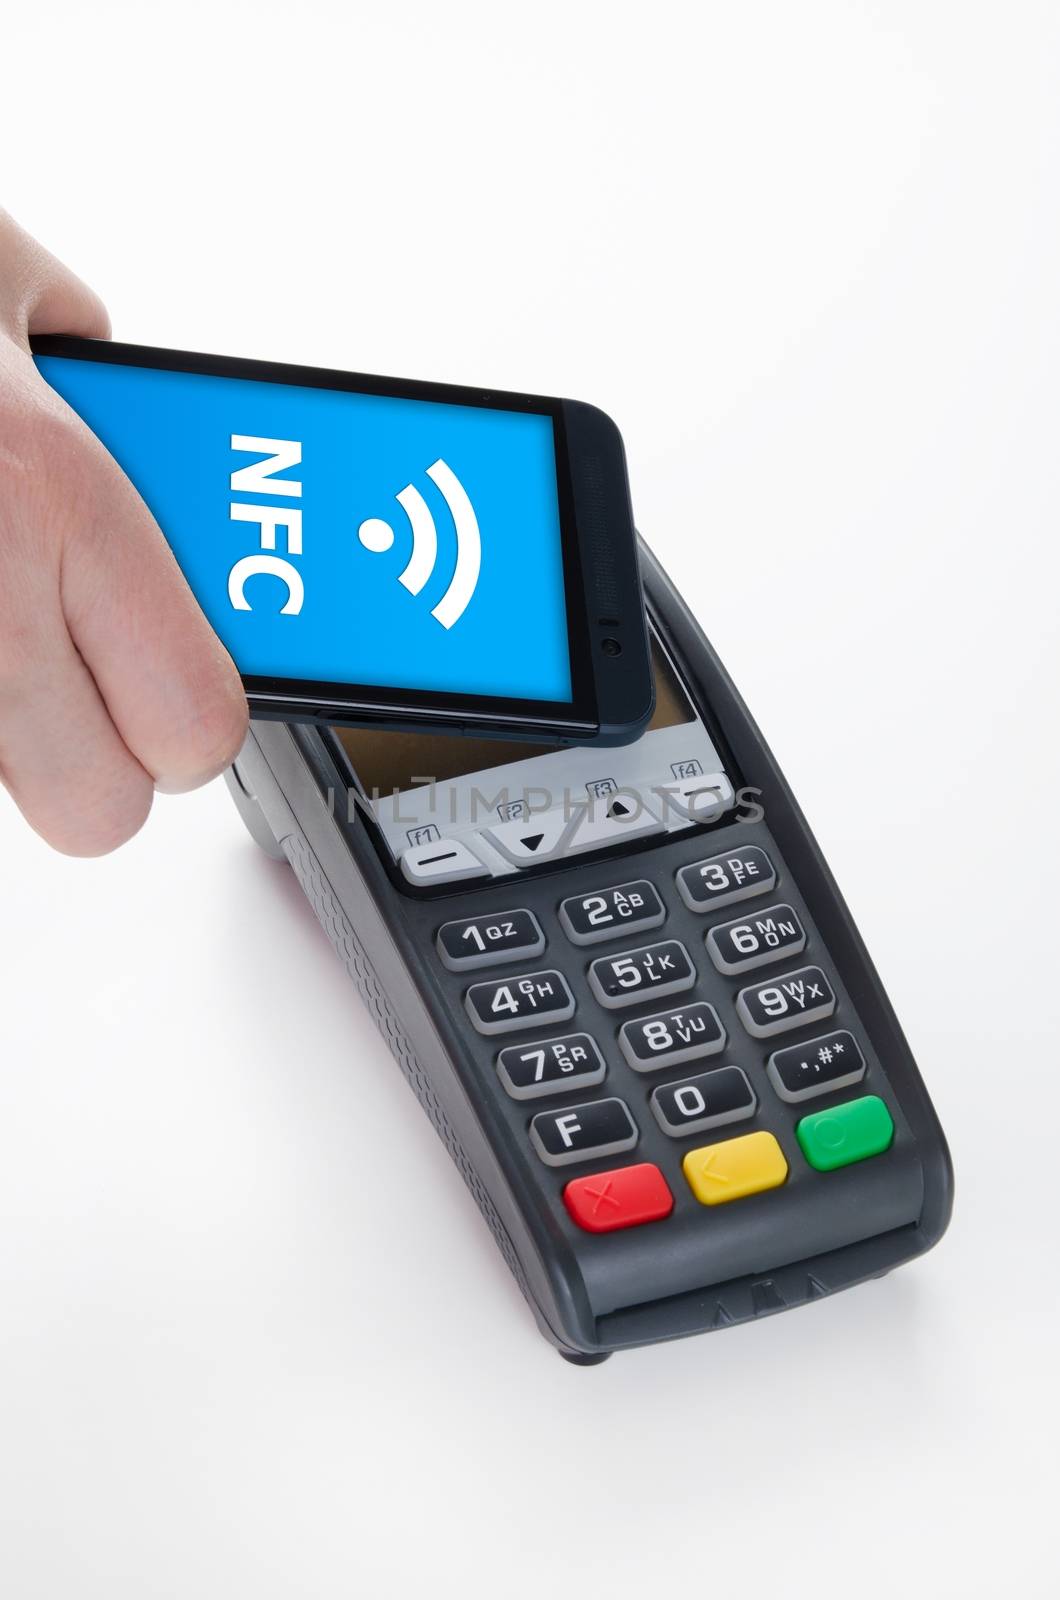 Mobile payment with NFC near field communication technology by simpson33